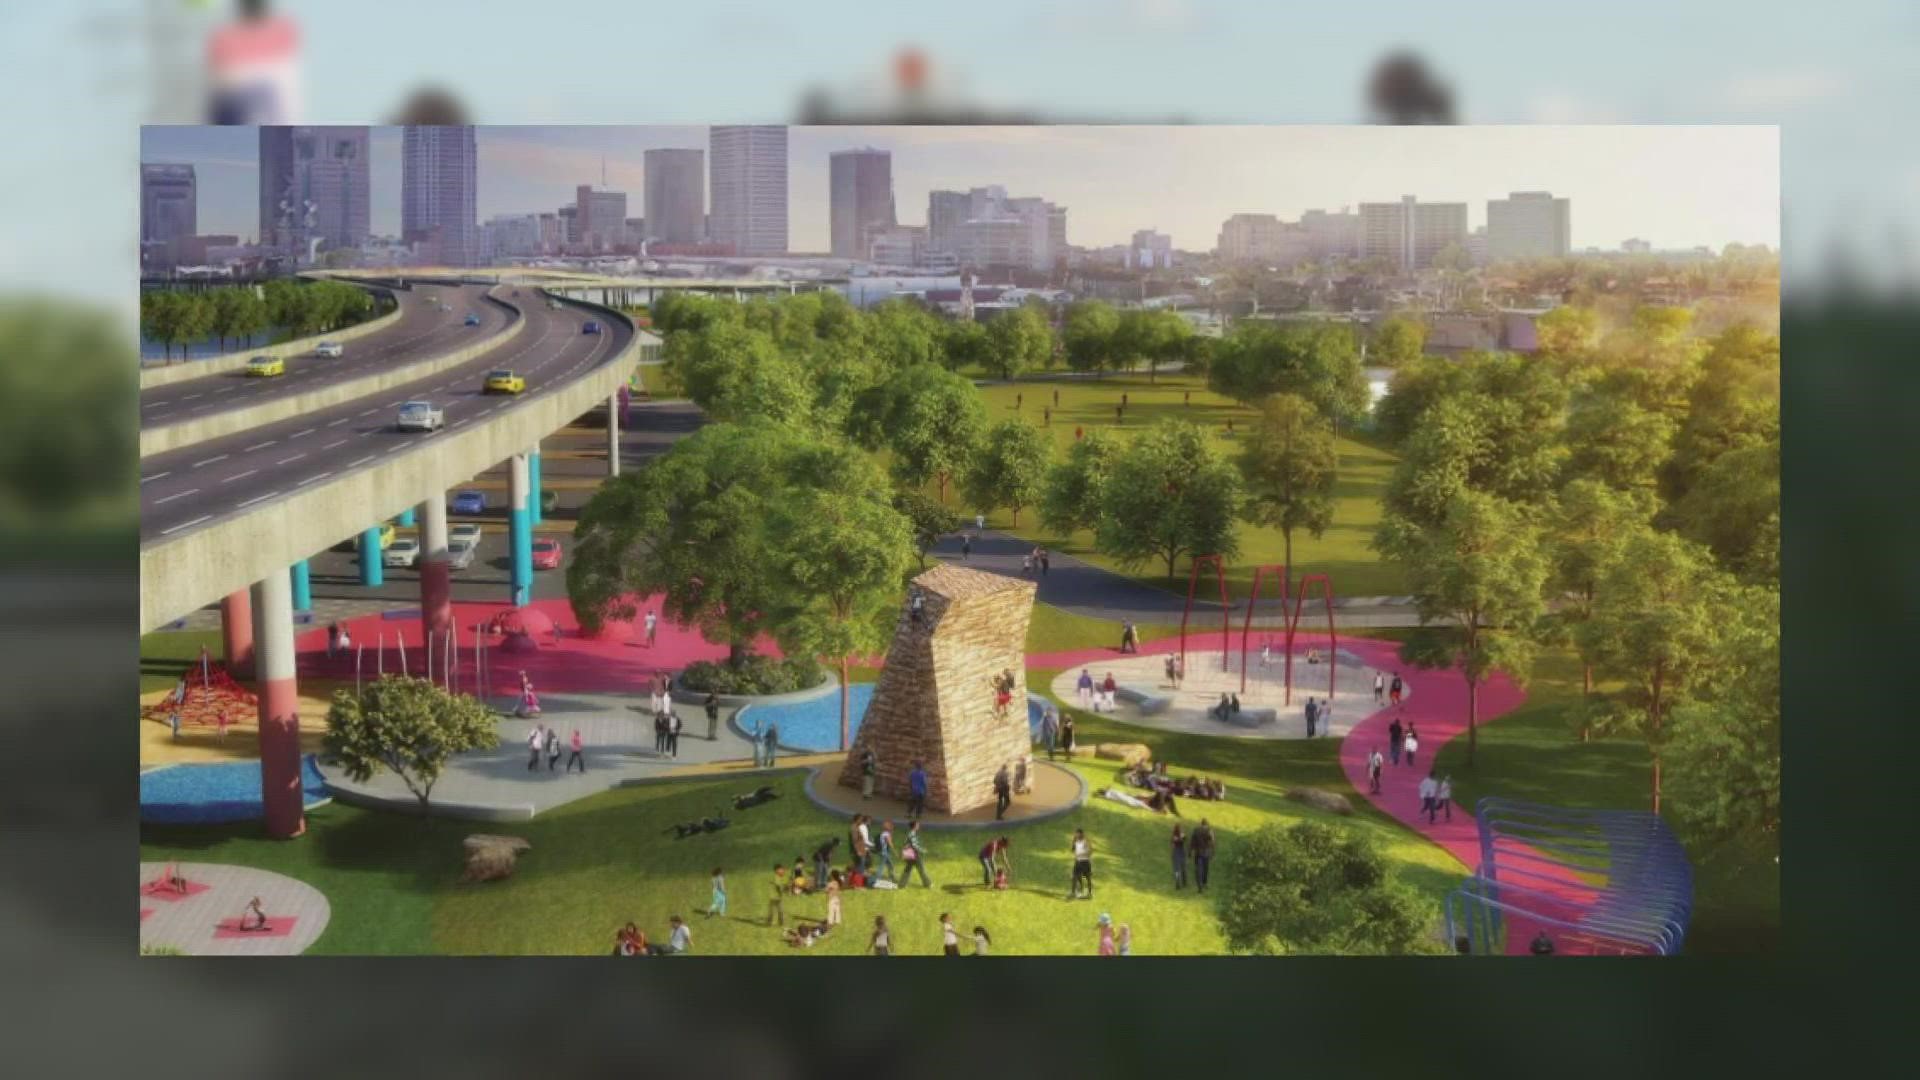 The $50-million project will bring an outdoor play and learning area, a revitalized walking path and help people get spectacular views of the Ohio River.